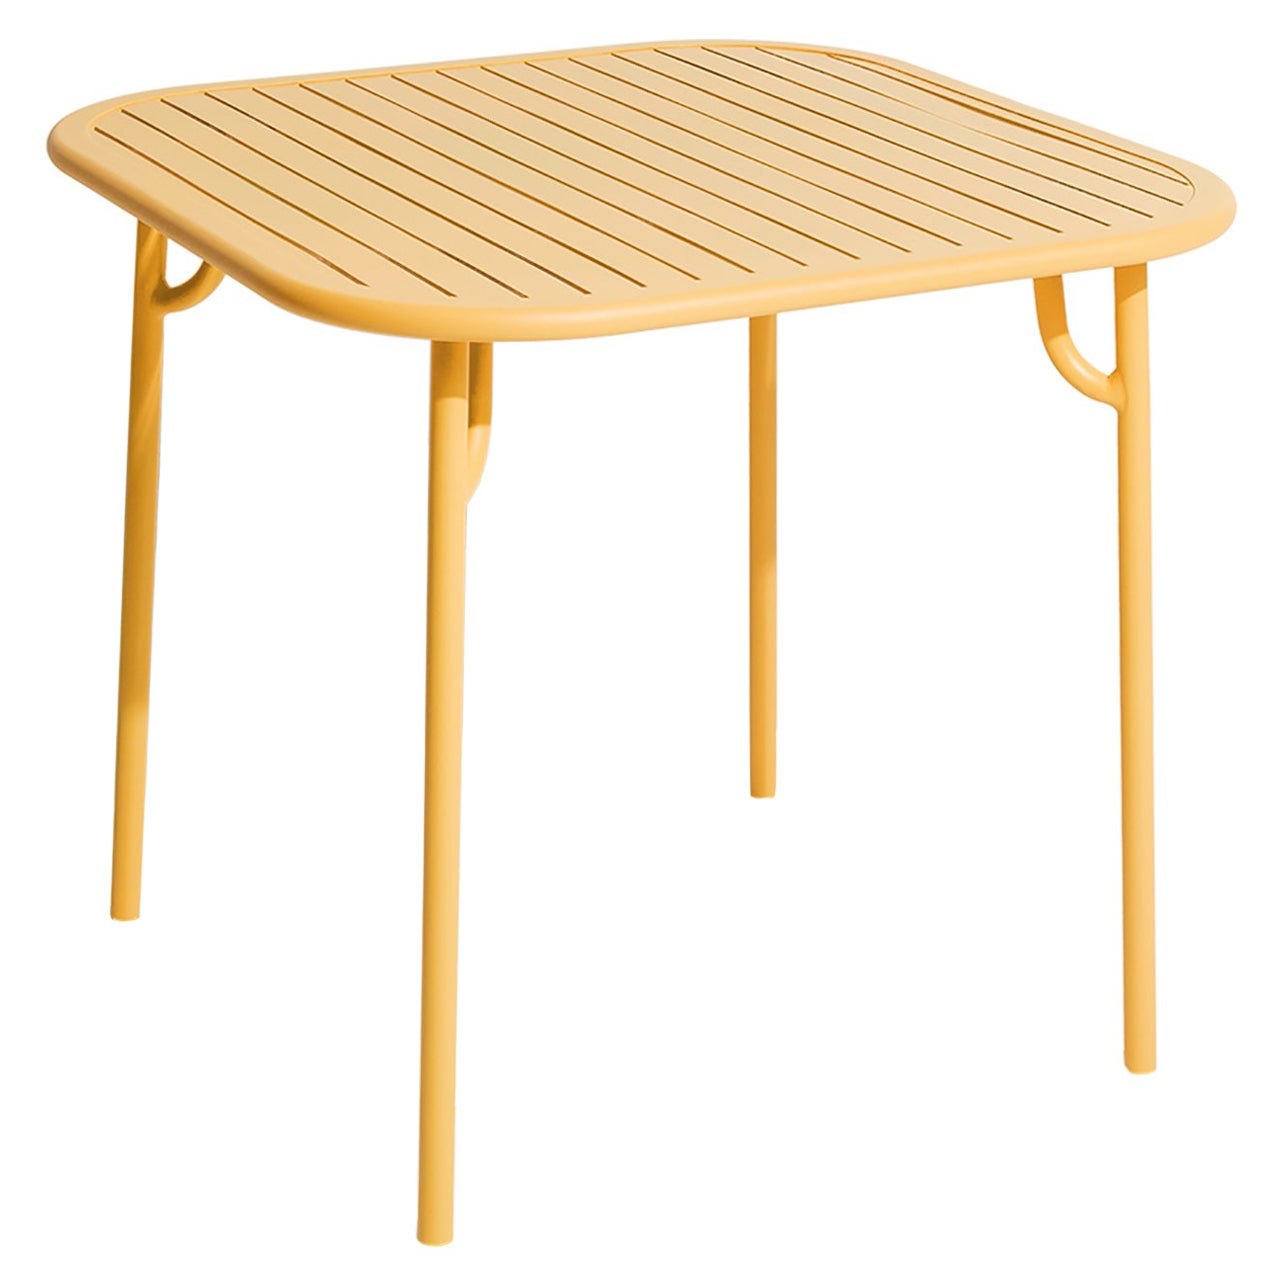 Petite Friture Week-End Square Dining Table in Saffron Aluminium with Slats For Sale